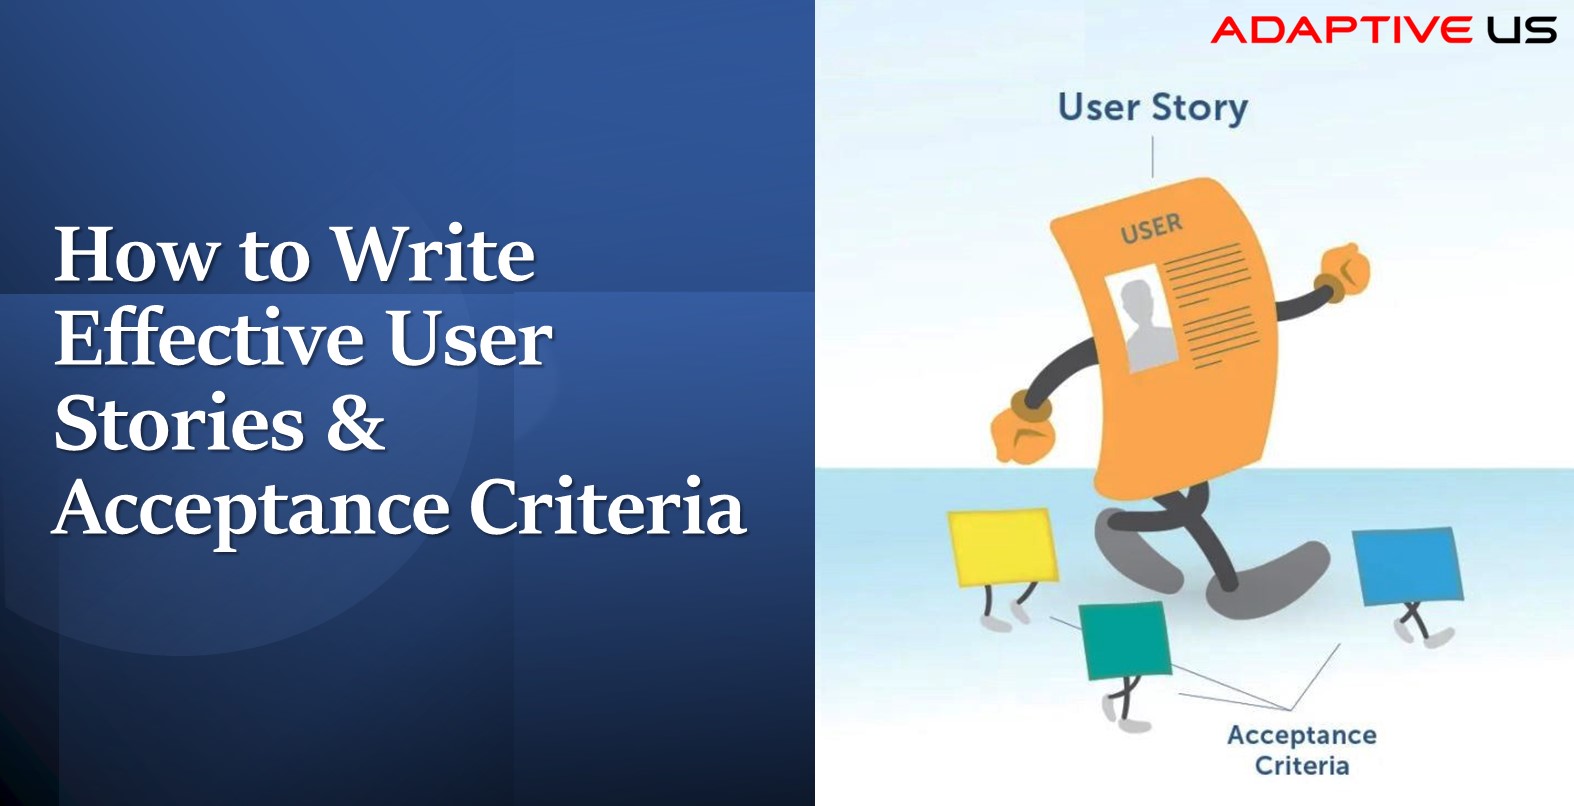 How to Write Effective User Stories & Acceptance Criteria